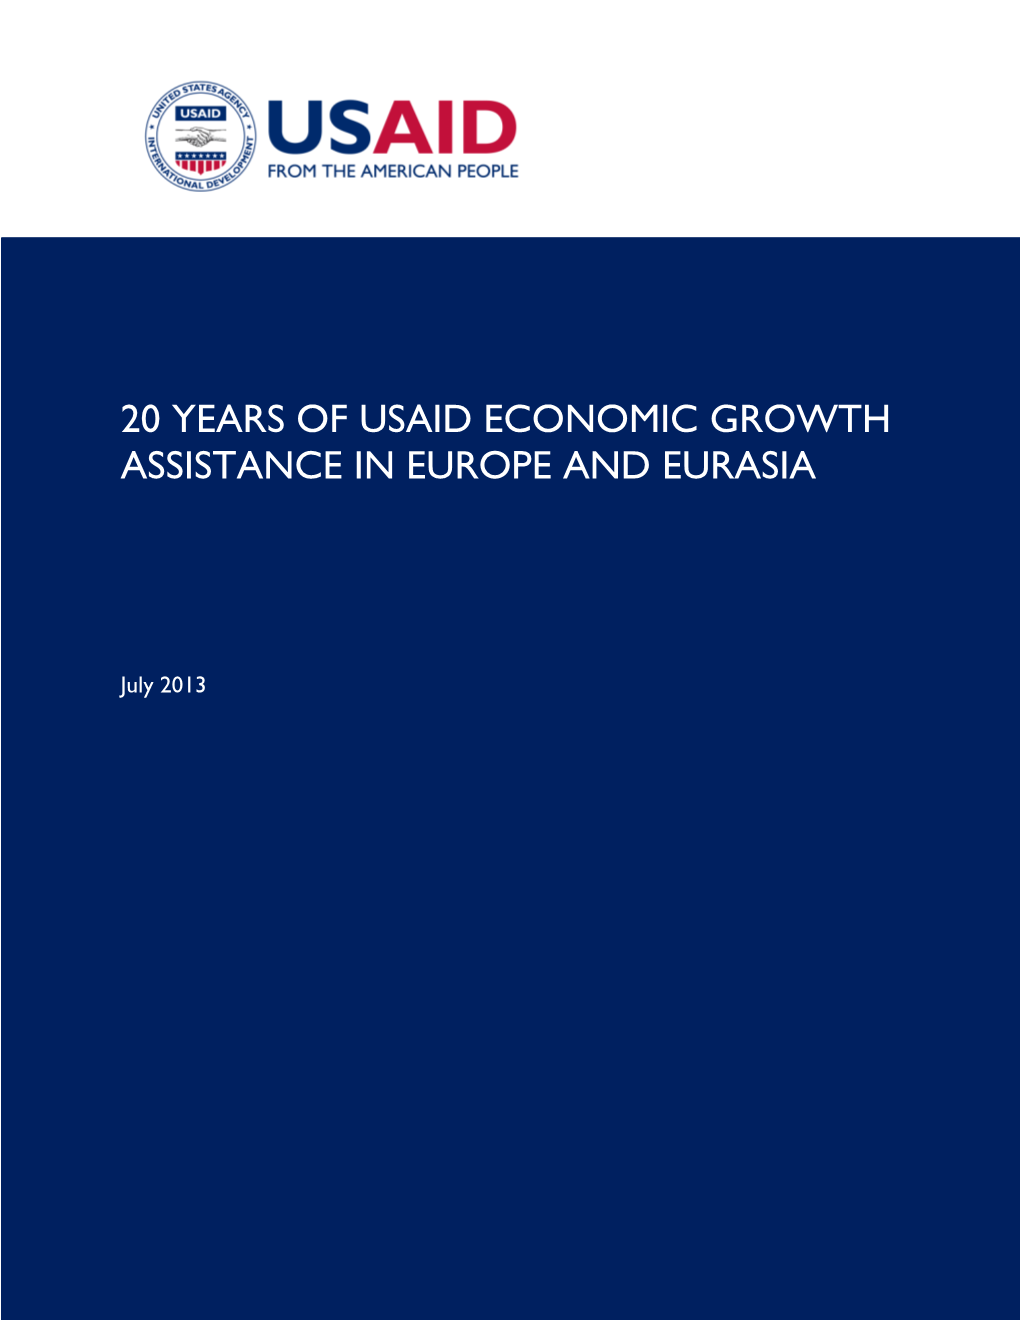 20 Years of Usaid Economic Growth Assistance in Europe and Eurasia